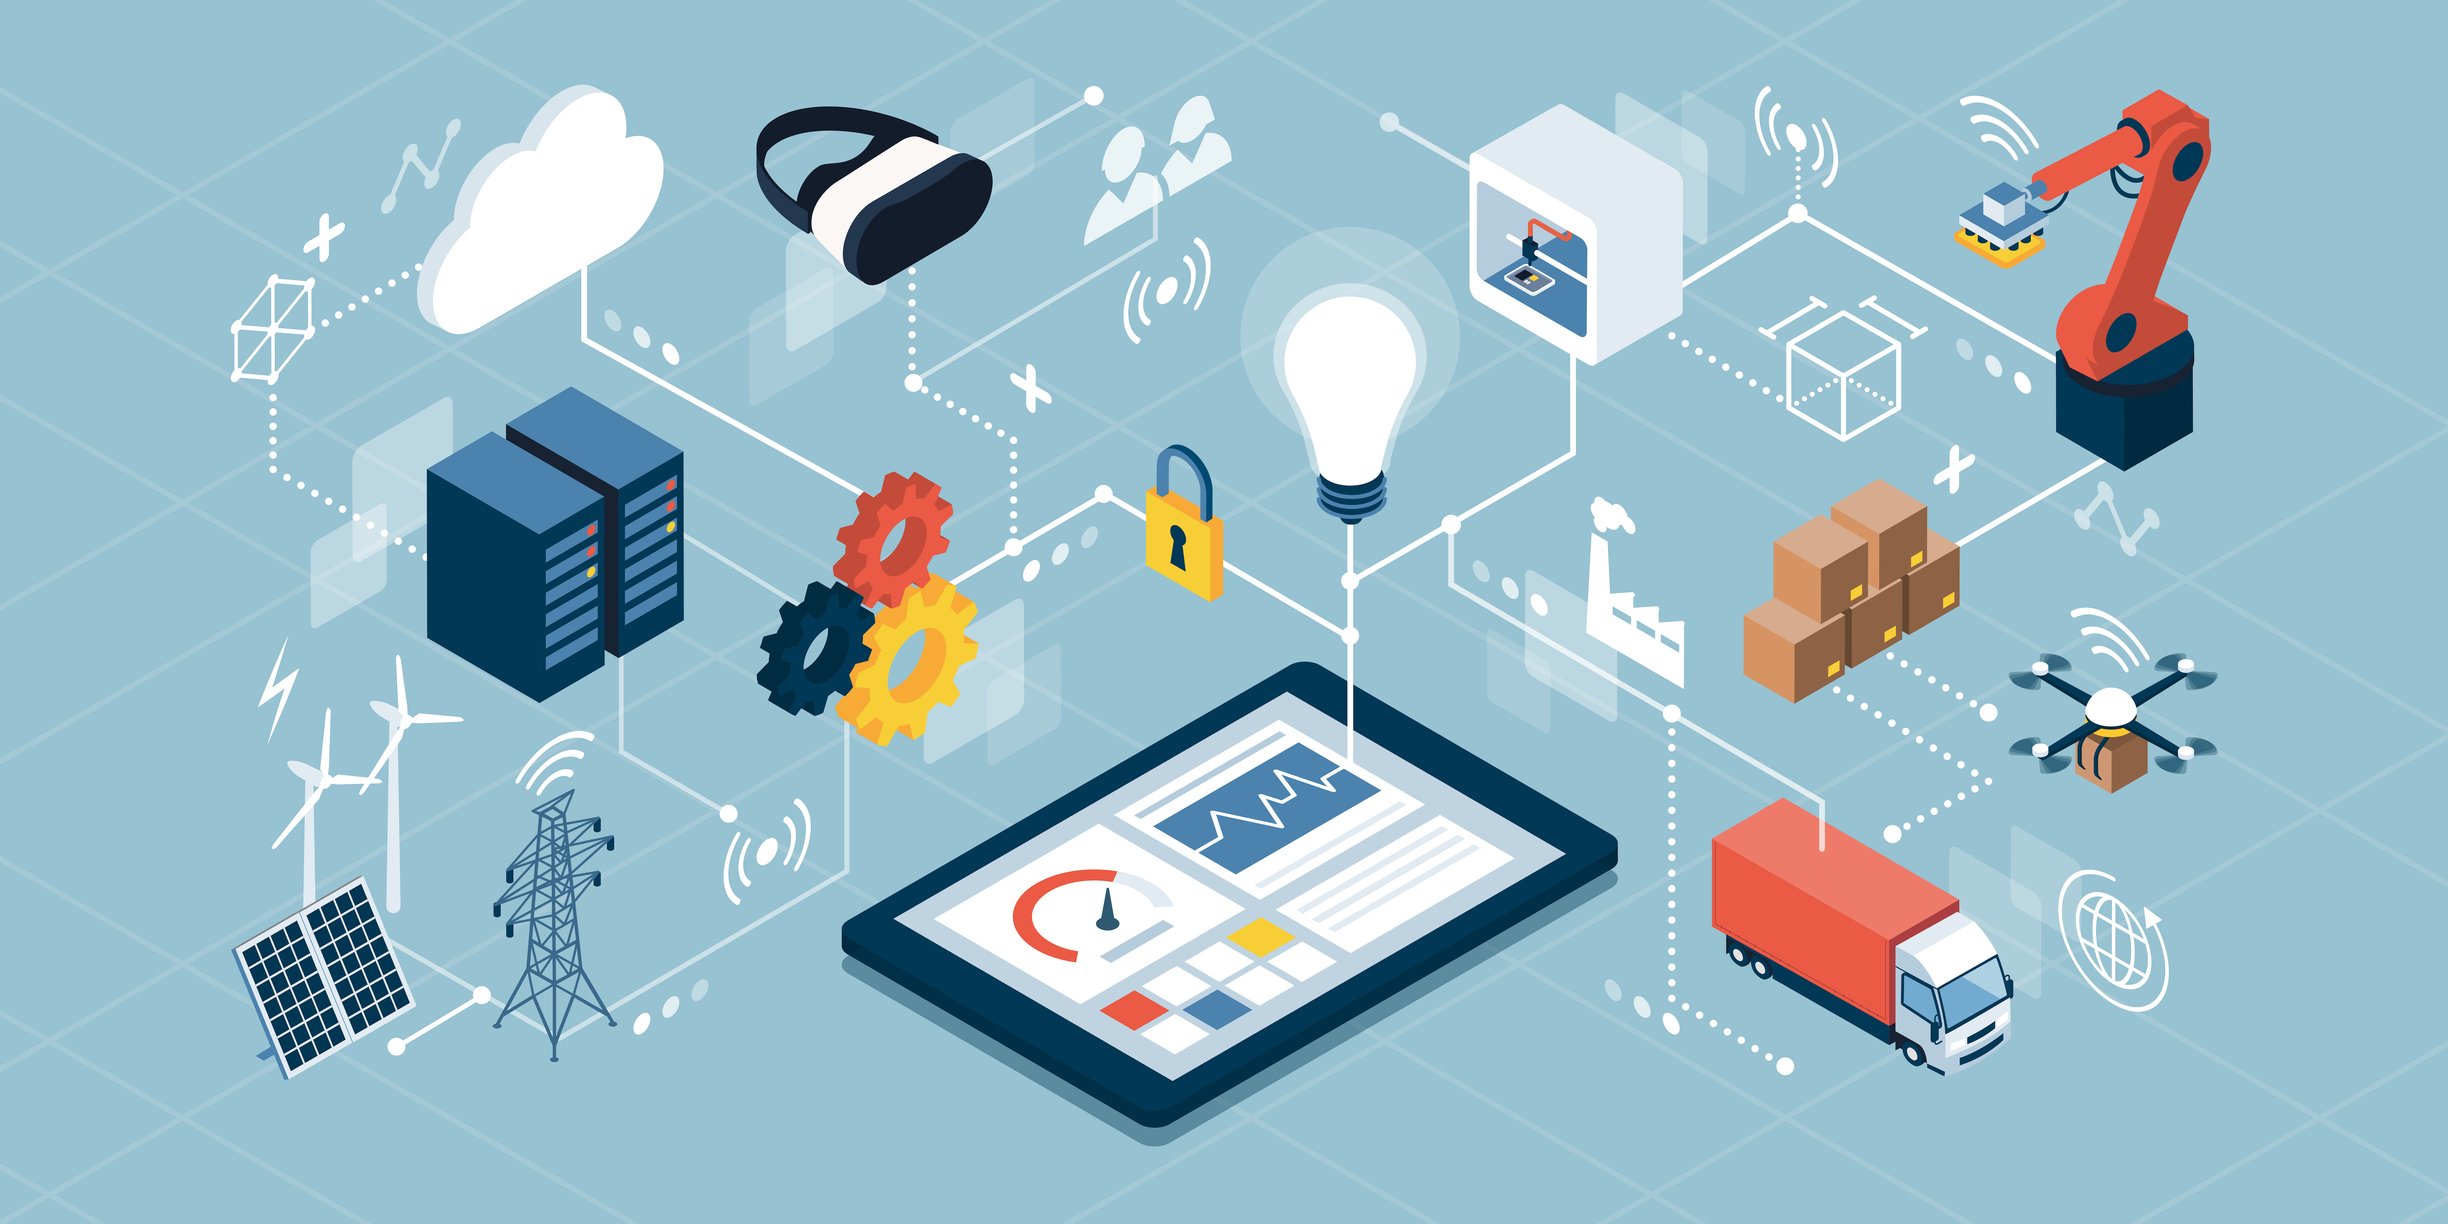 IoT in the supply chain